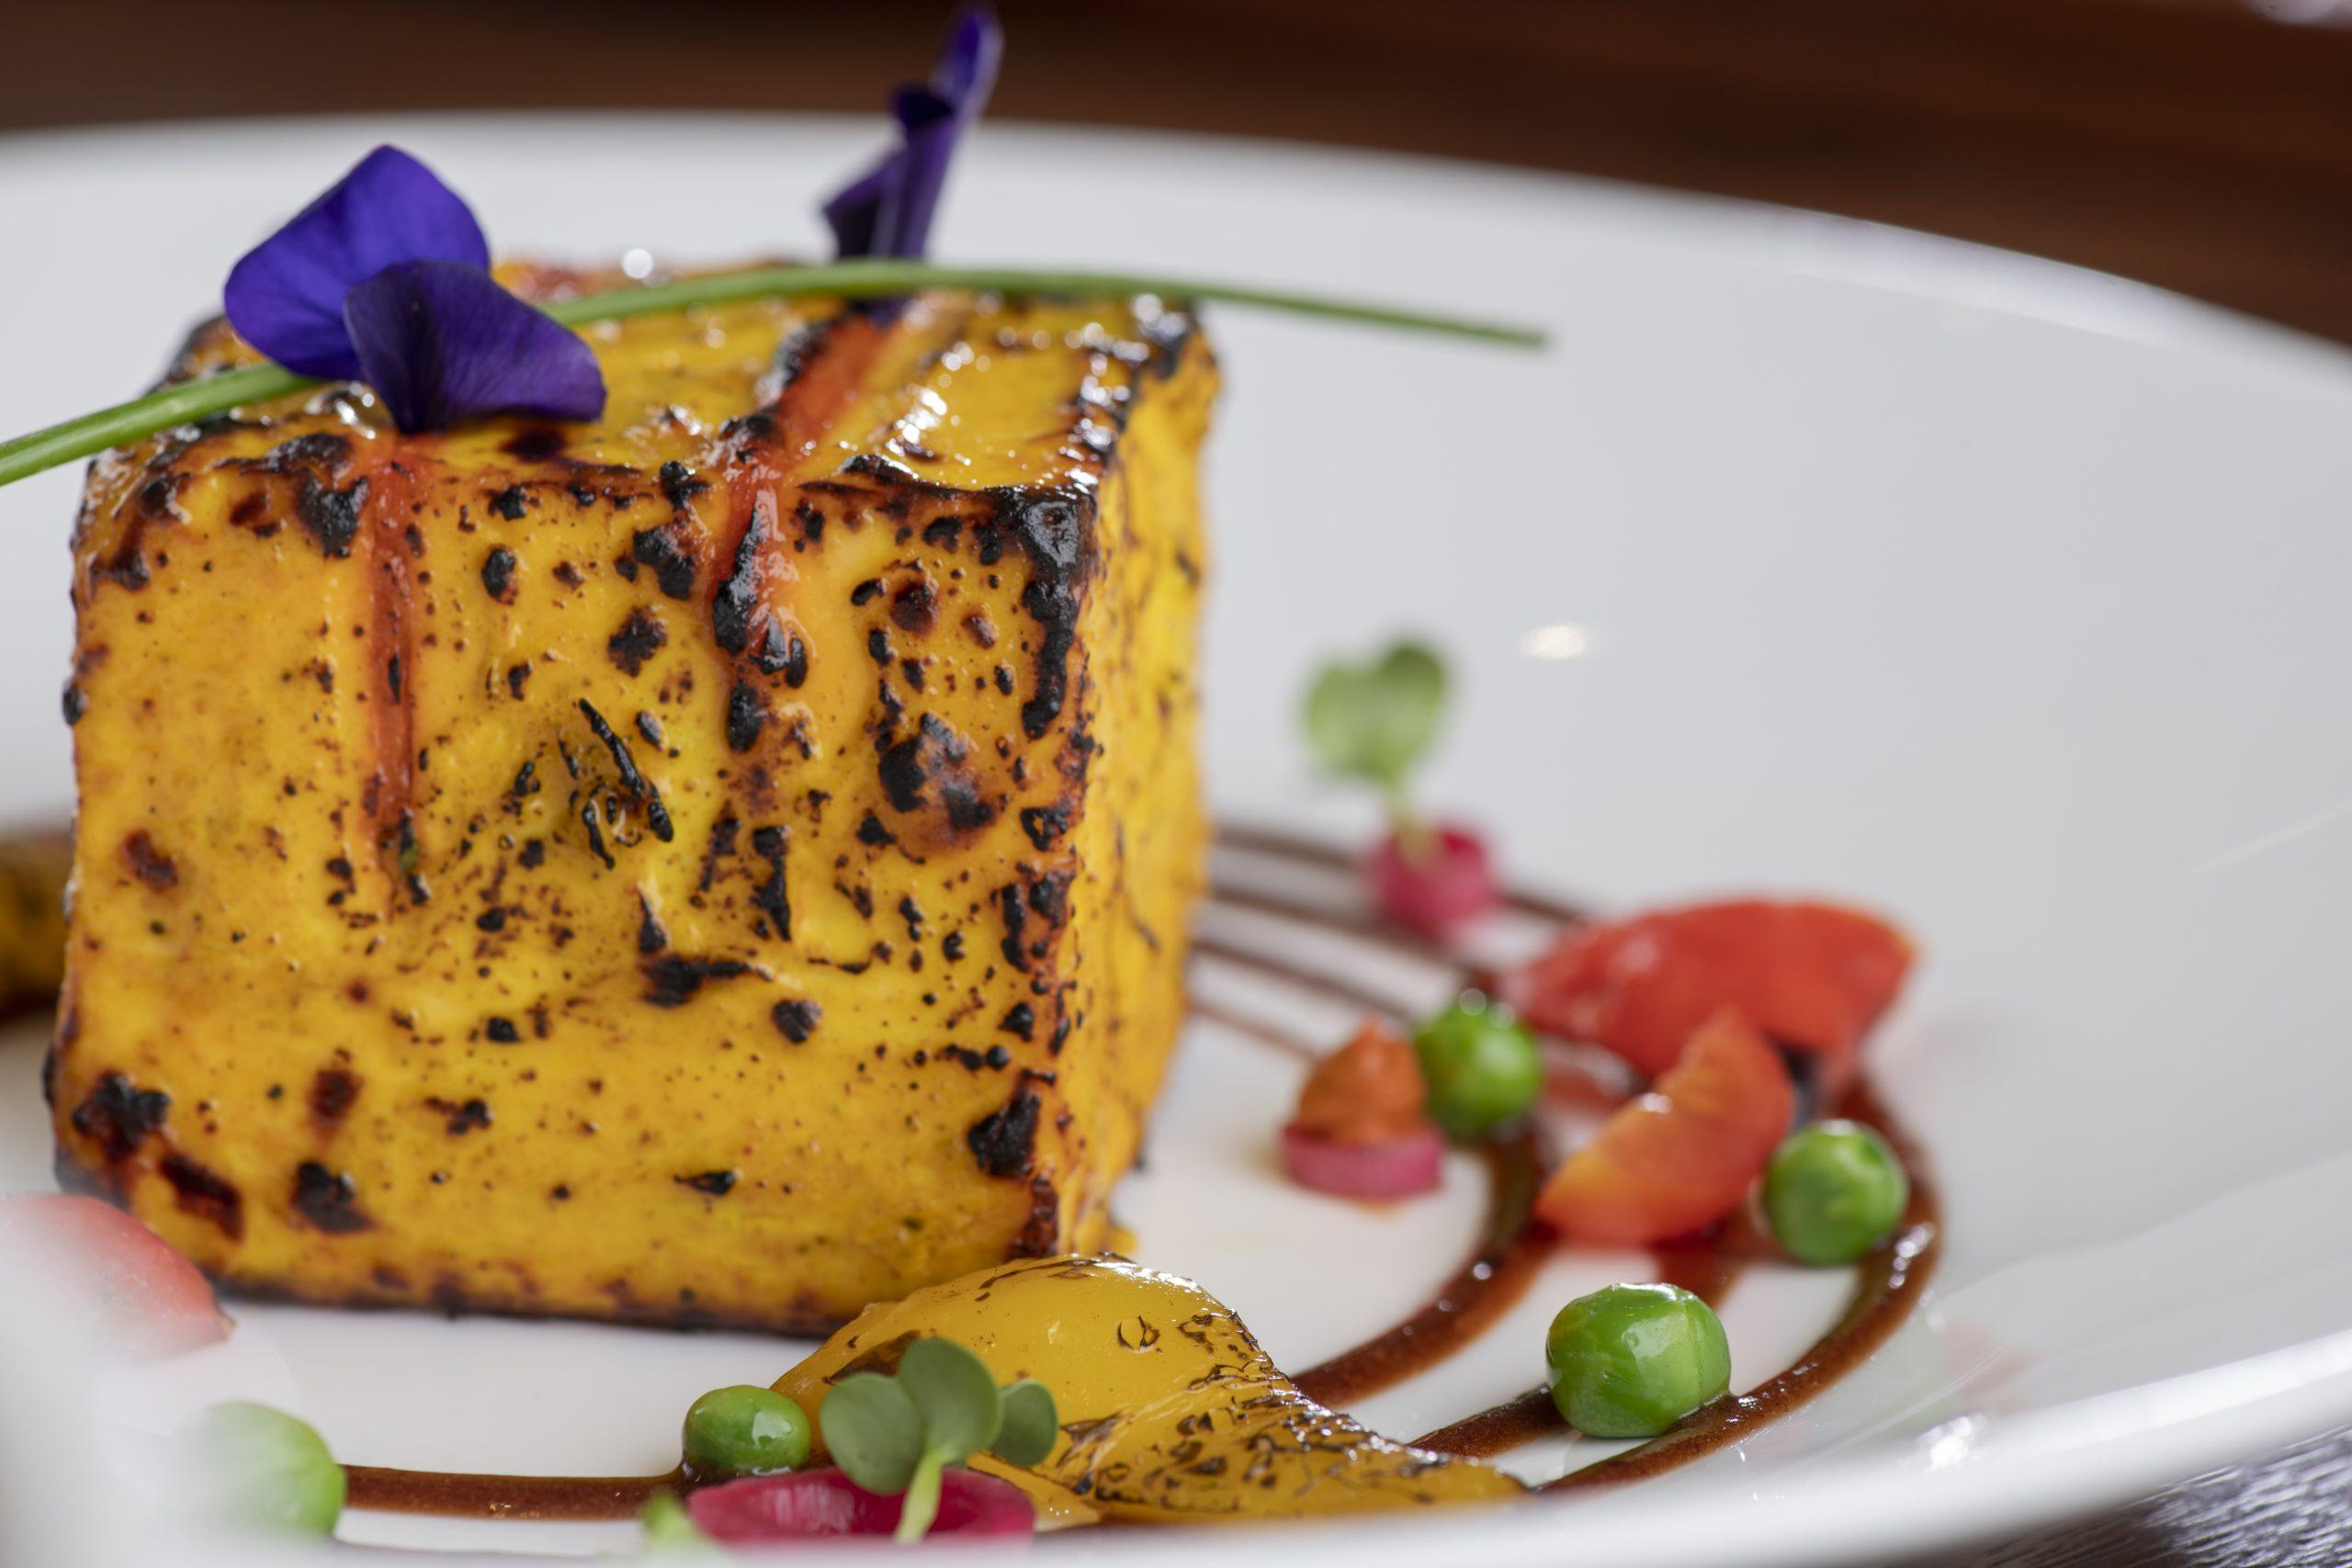 Acclaimed Indian restaurant Punjab Grill is opening at The Oberoi, Dubai